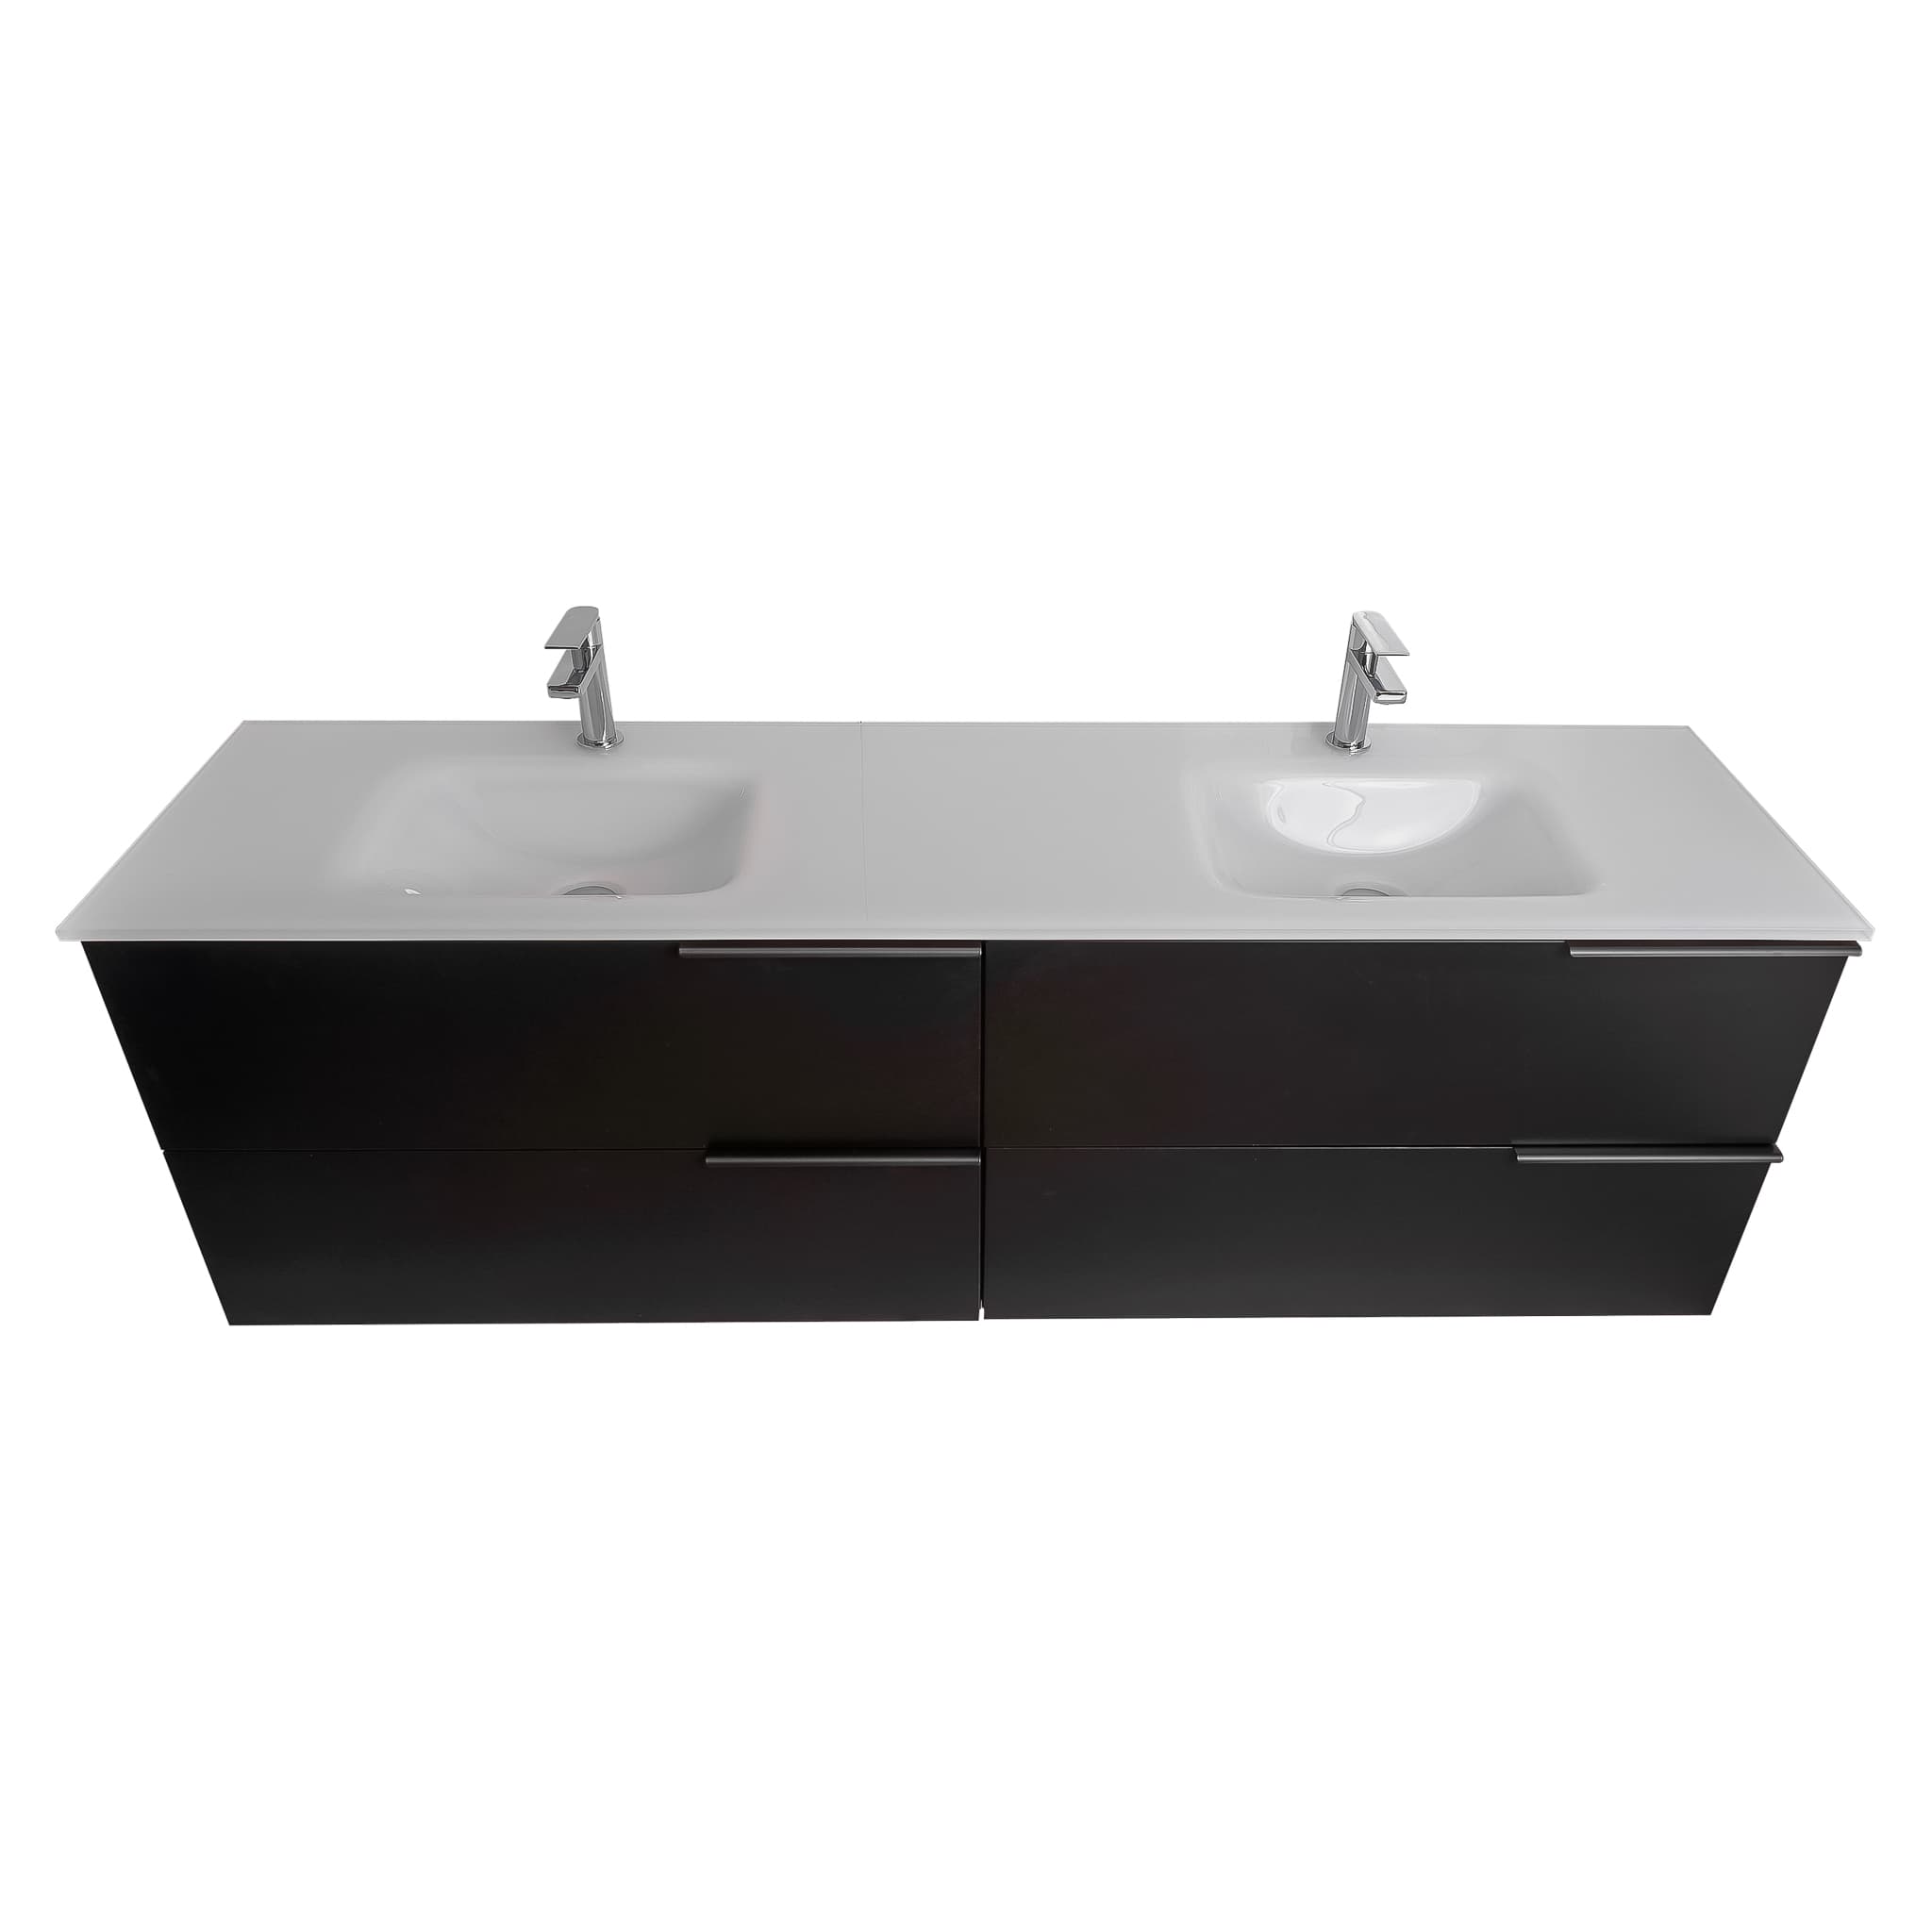 Mallorca 72 Matte Black Cabinet, White Tempered Glass Double Sink, Wall Mounted Modern Vanity Set